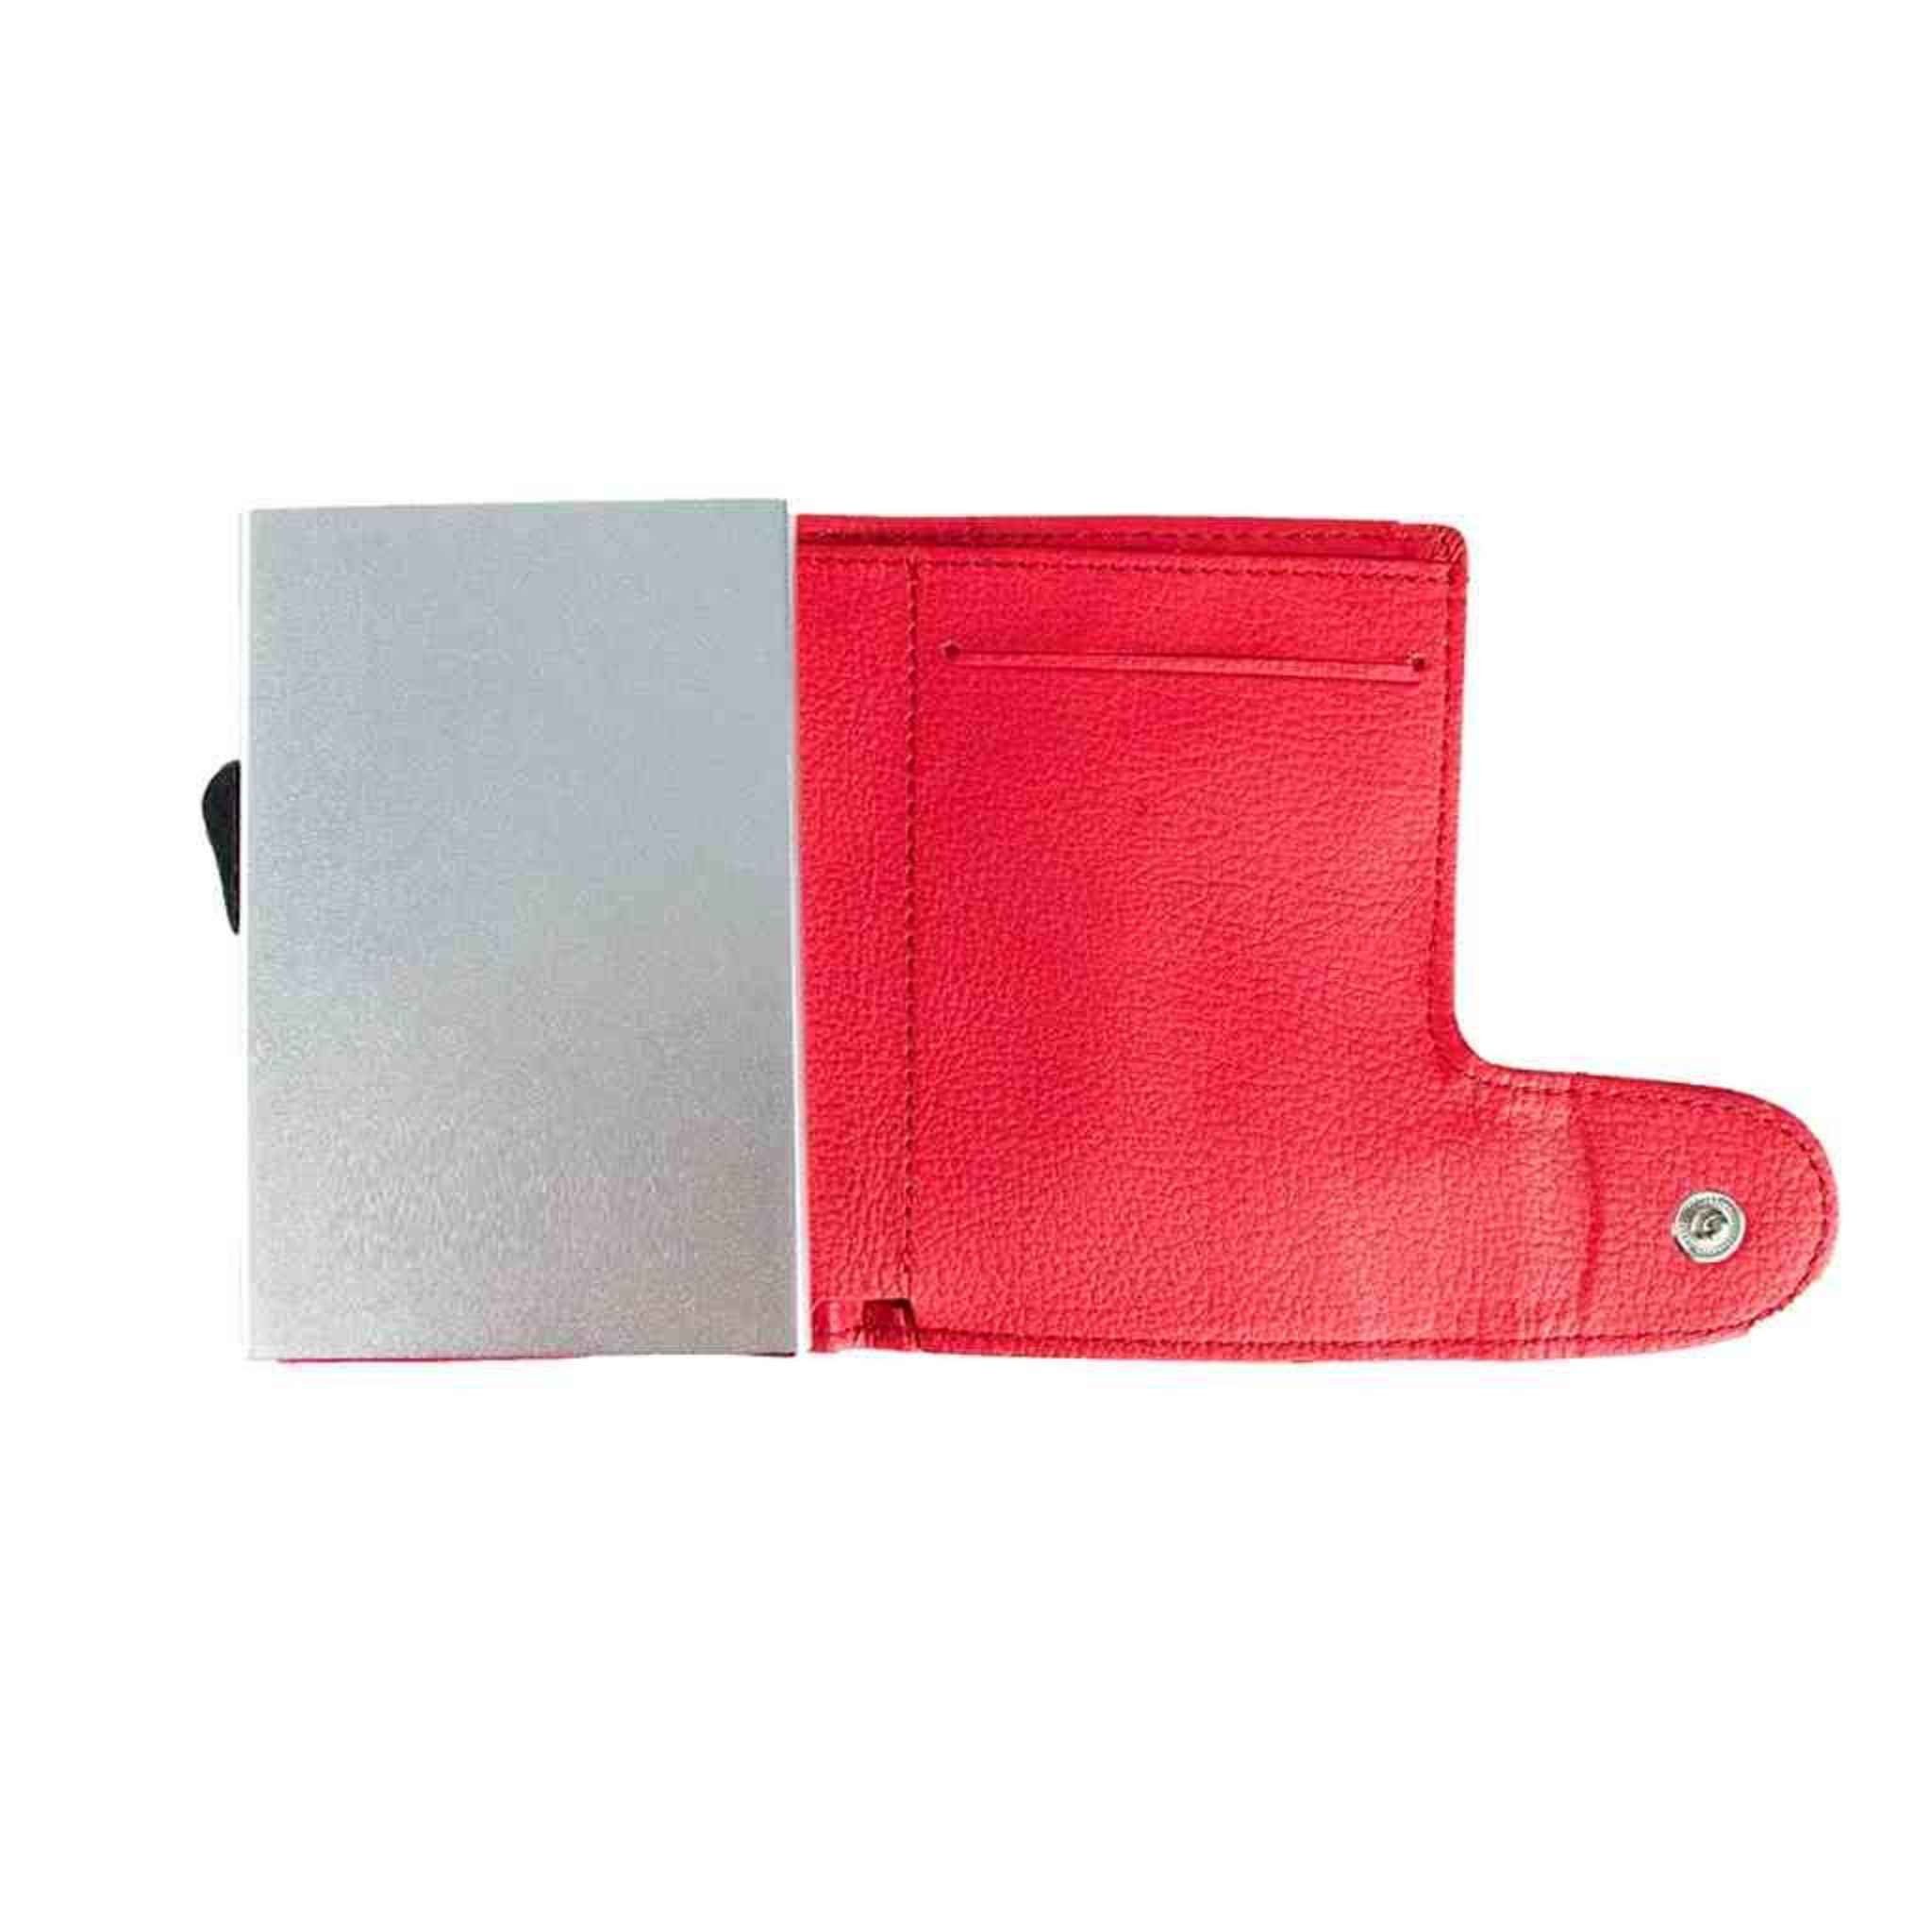 Open Red Card holder and wallet